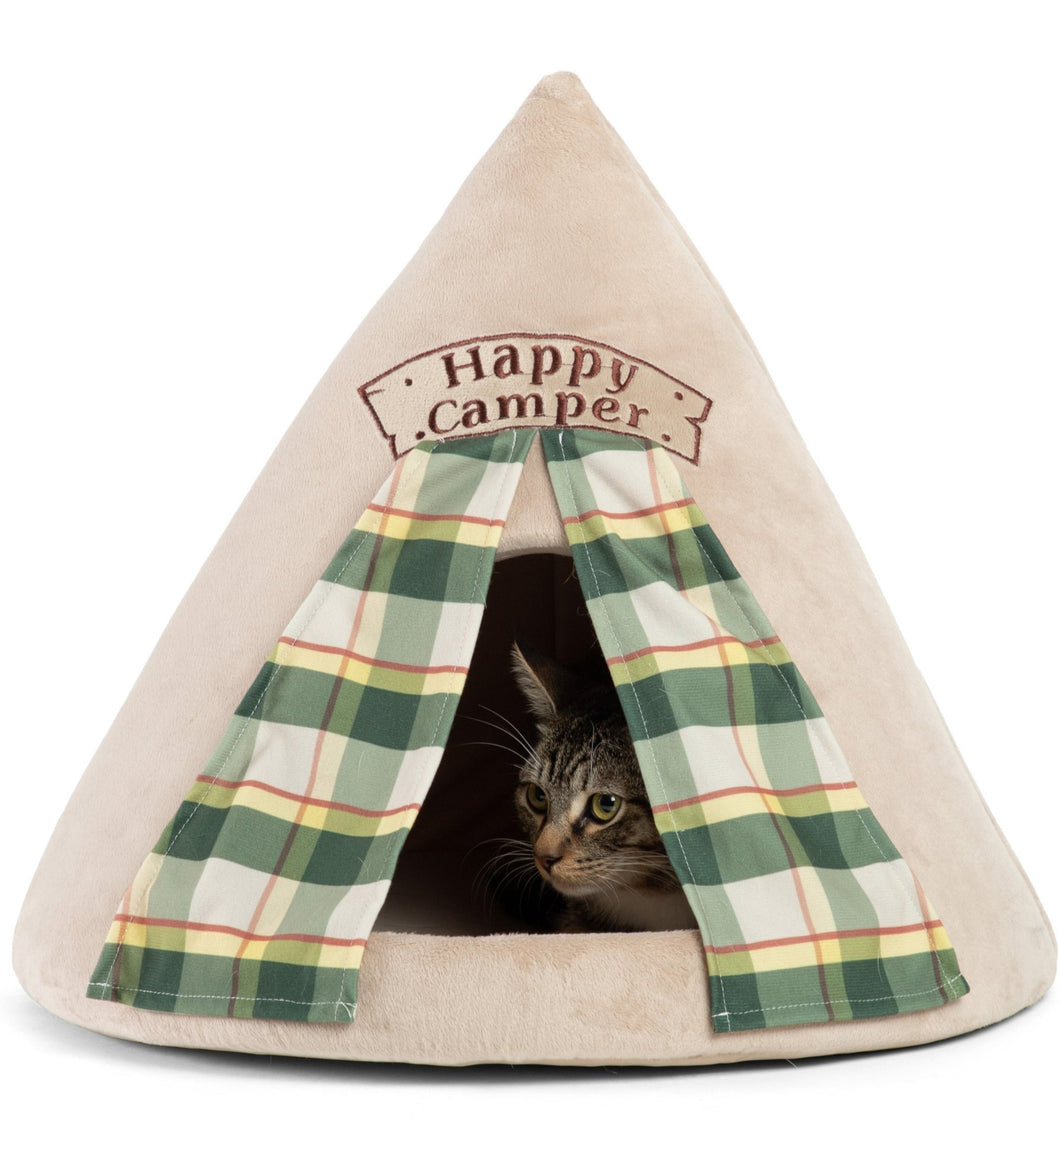 Cat resting inside Happy Camper Novelty Cat Hut from Cat Supplies and More